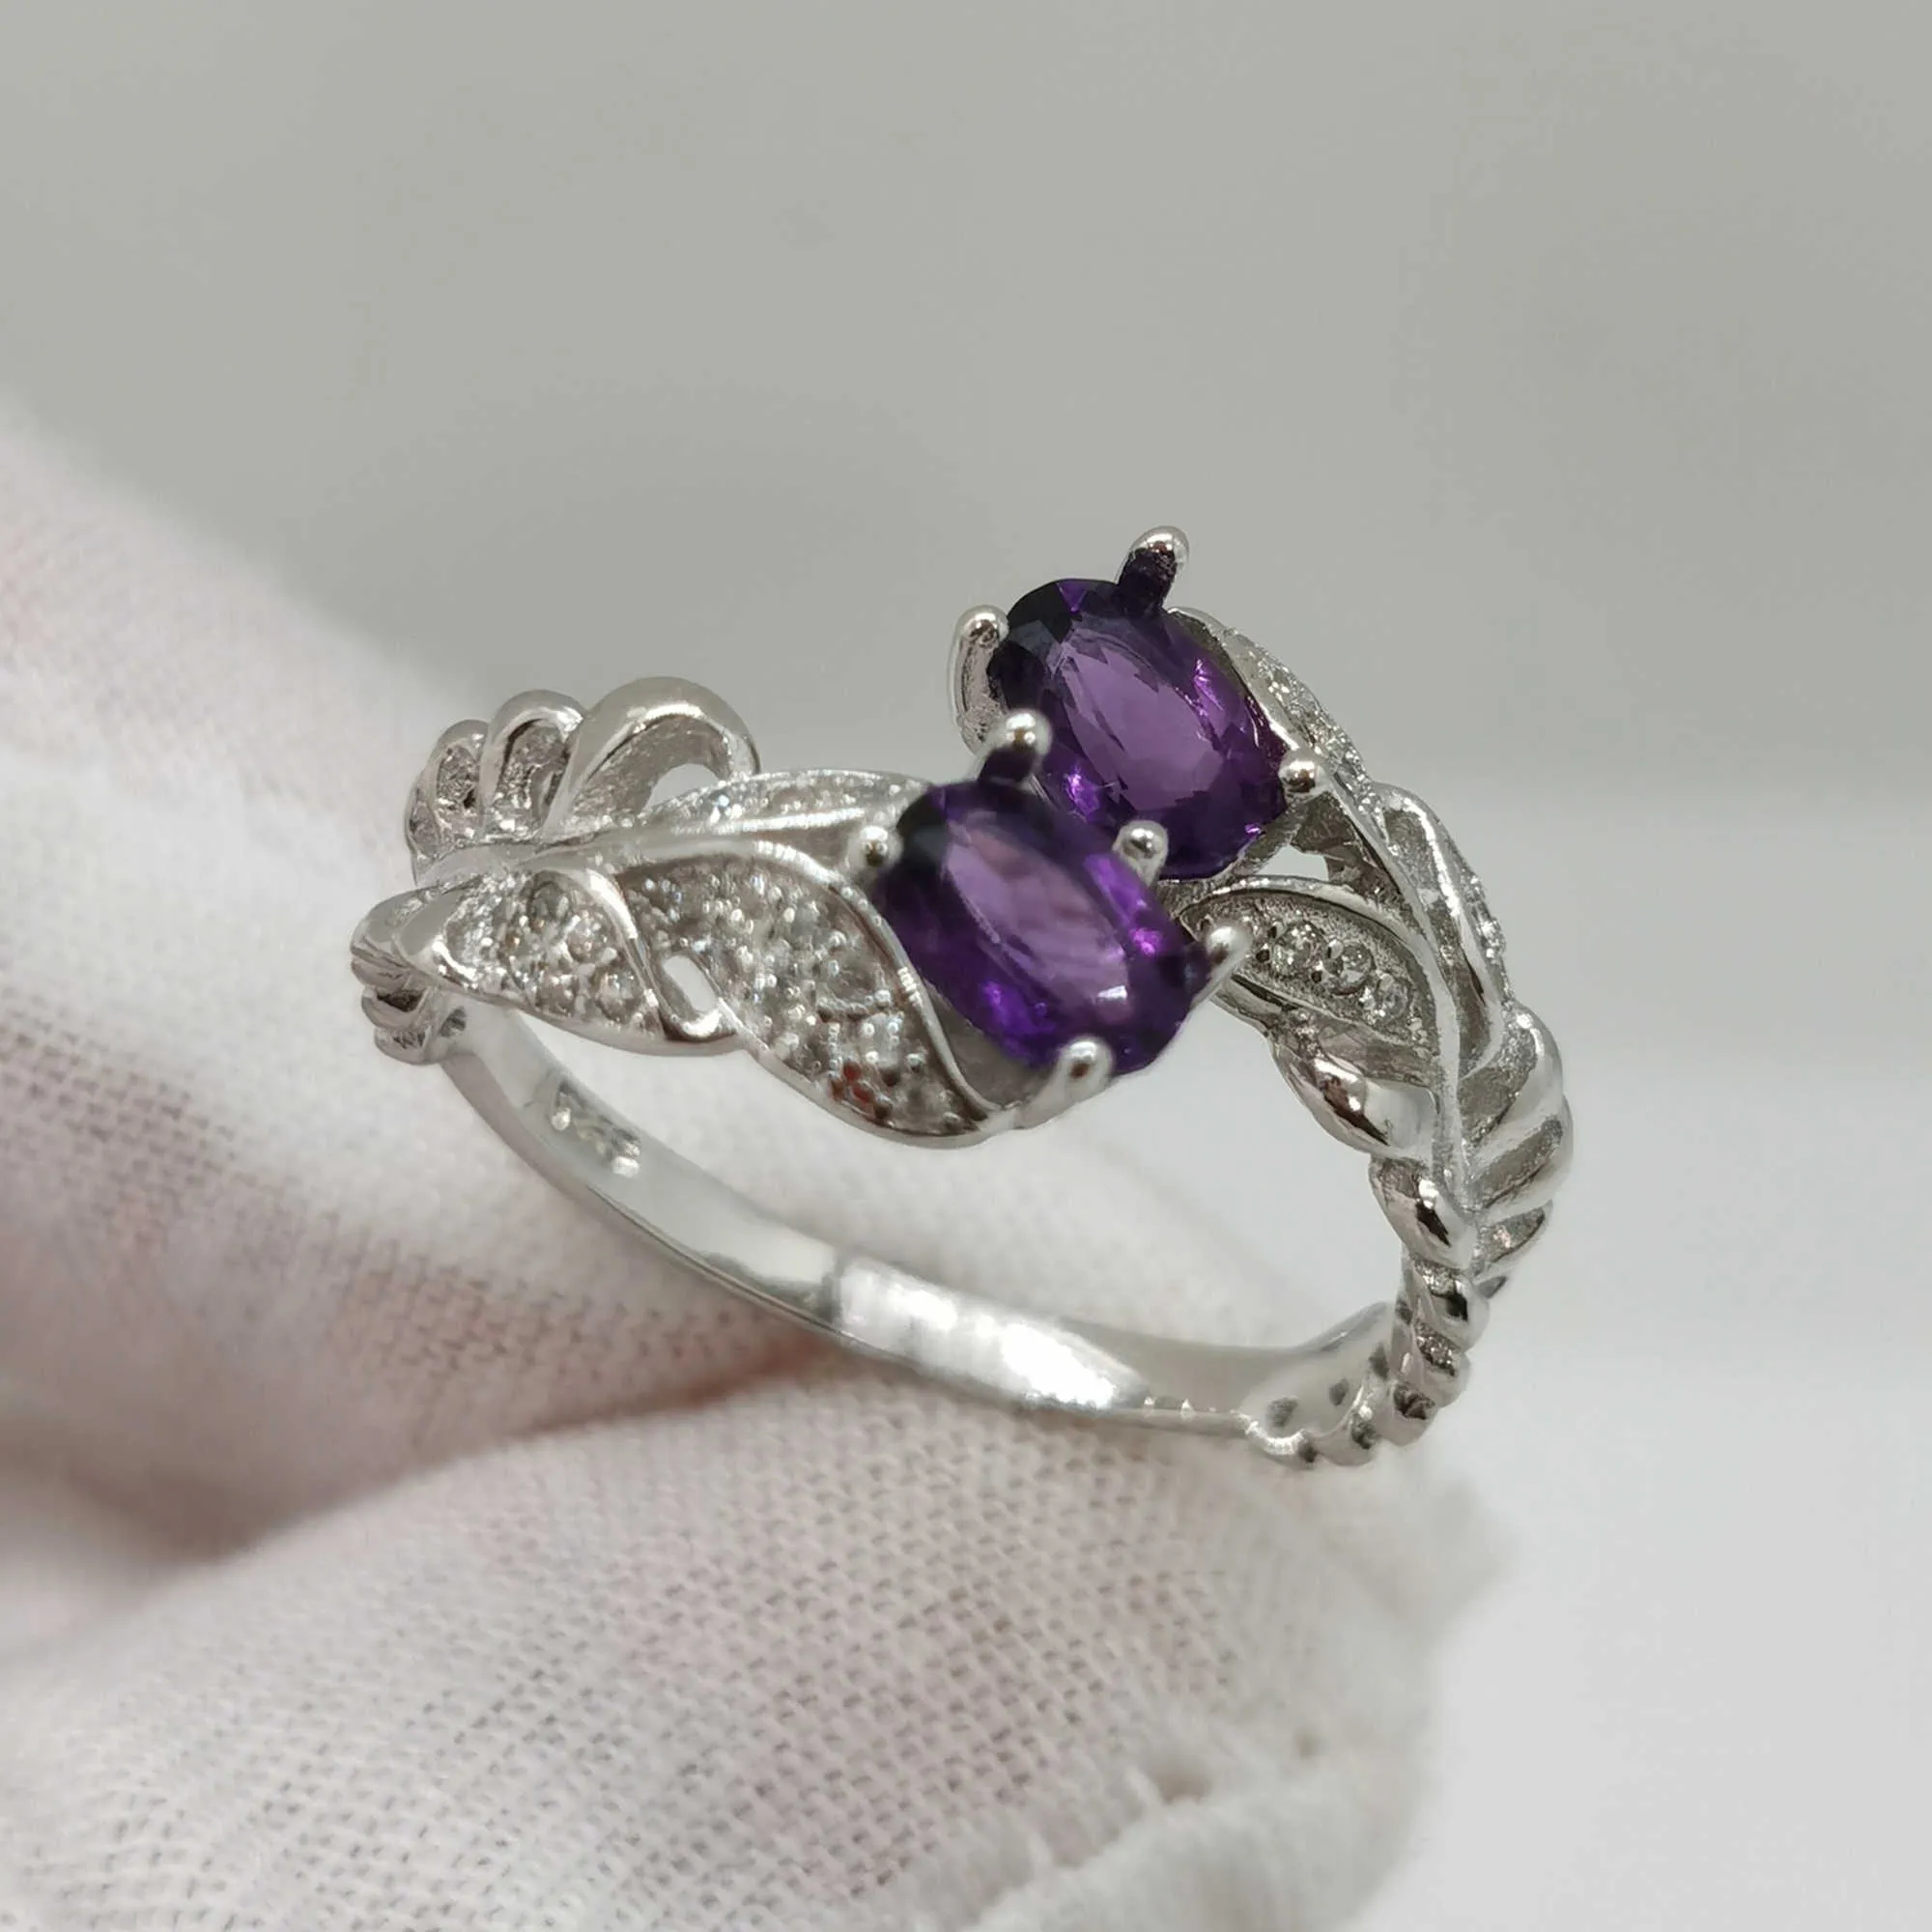 Solitaire Ring Real Amethyst Silver Total 1ct 4mm*6mm VVS Grade Jewelry Fashion 925 Open Y2302